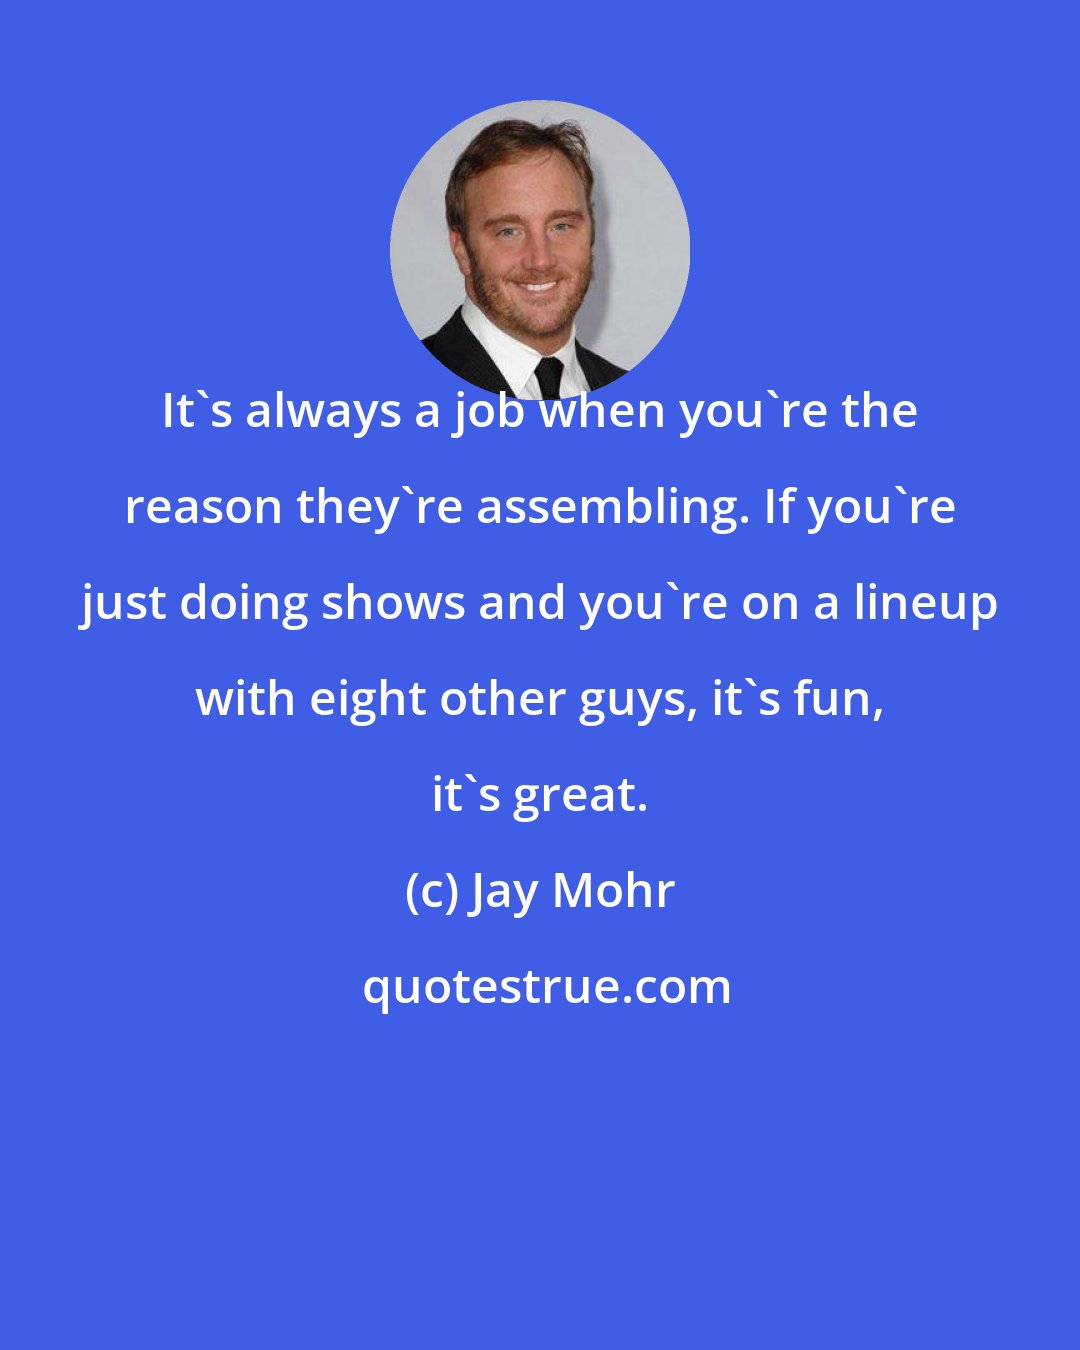 Jay Mohr: It's always a job when you're the reason they're assembling. If you're just doing shows and you're on a lineup with eight other guys, it's fun, it's great.